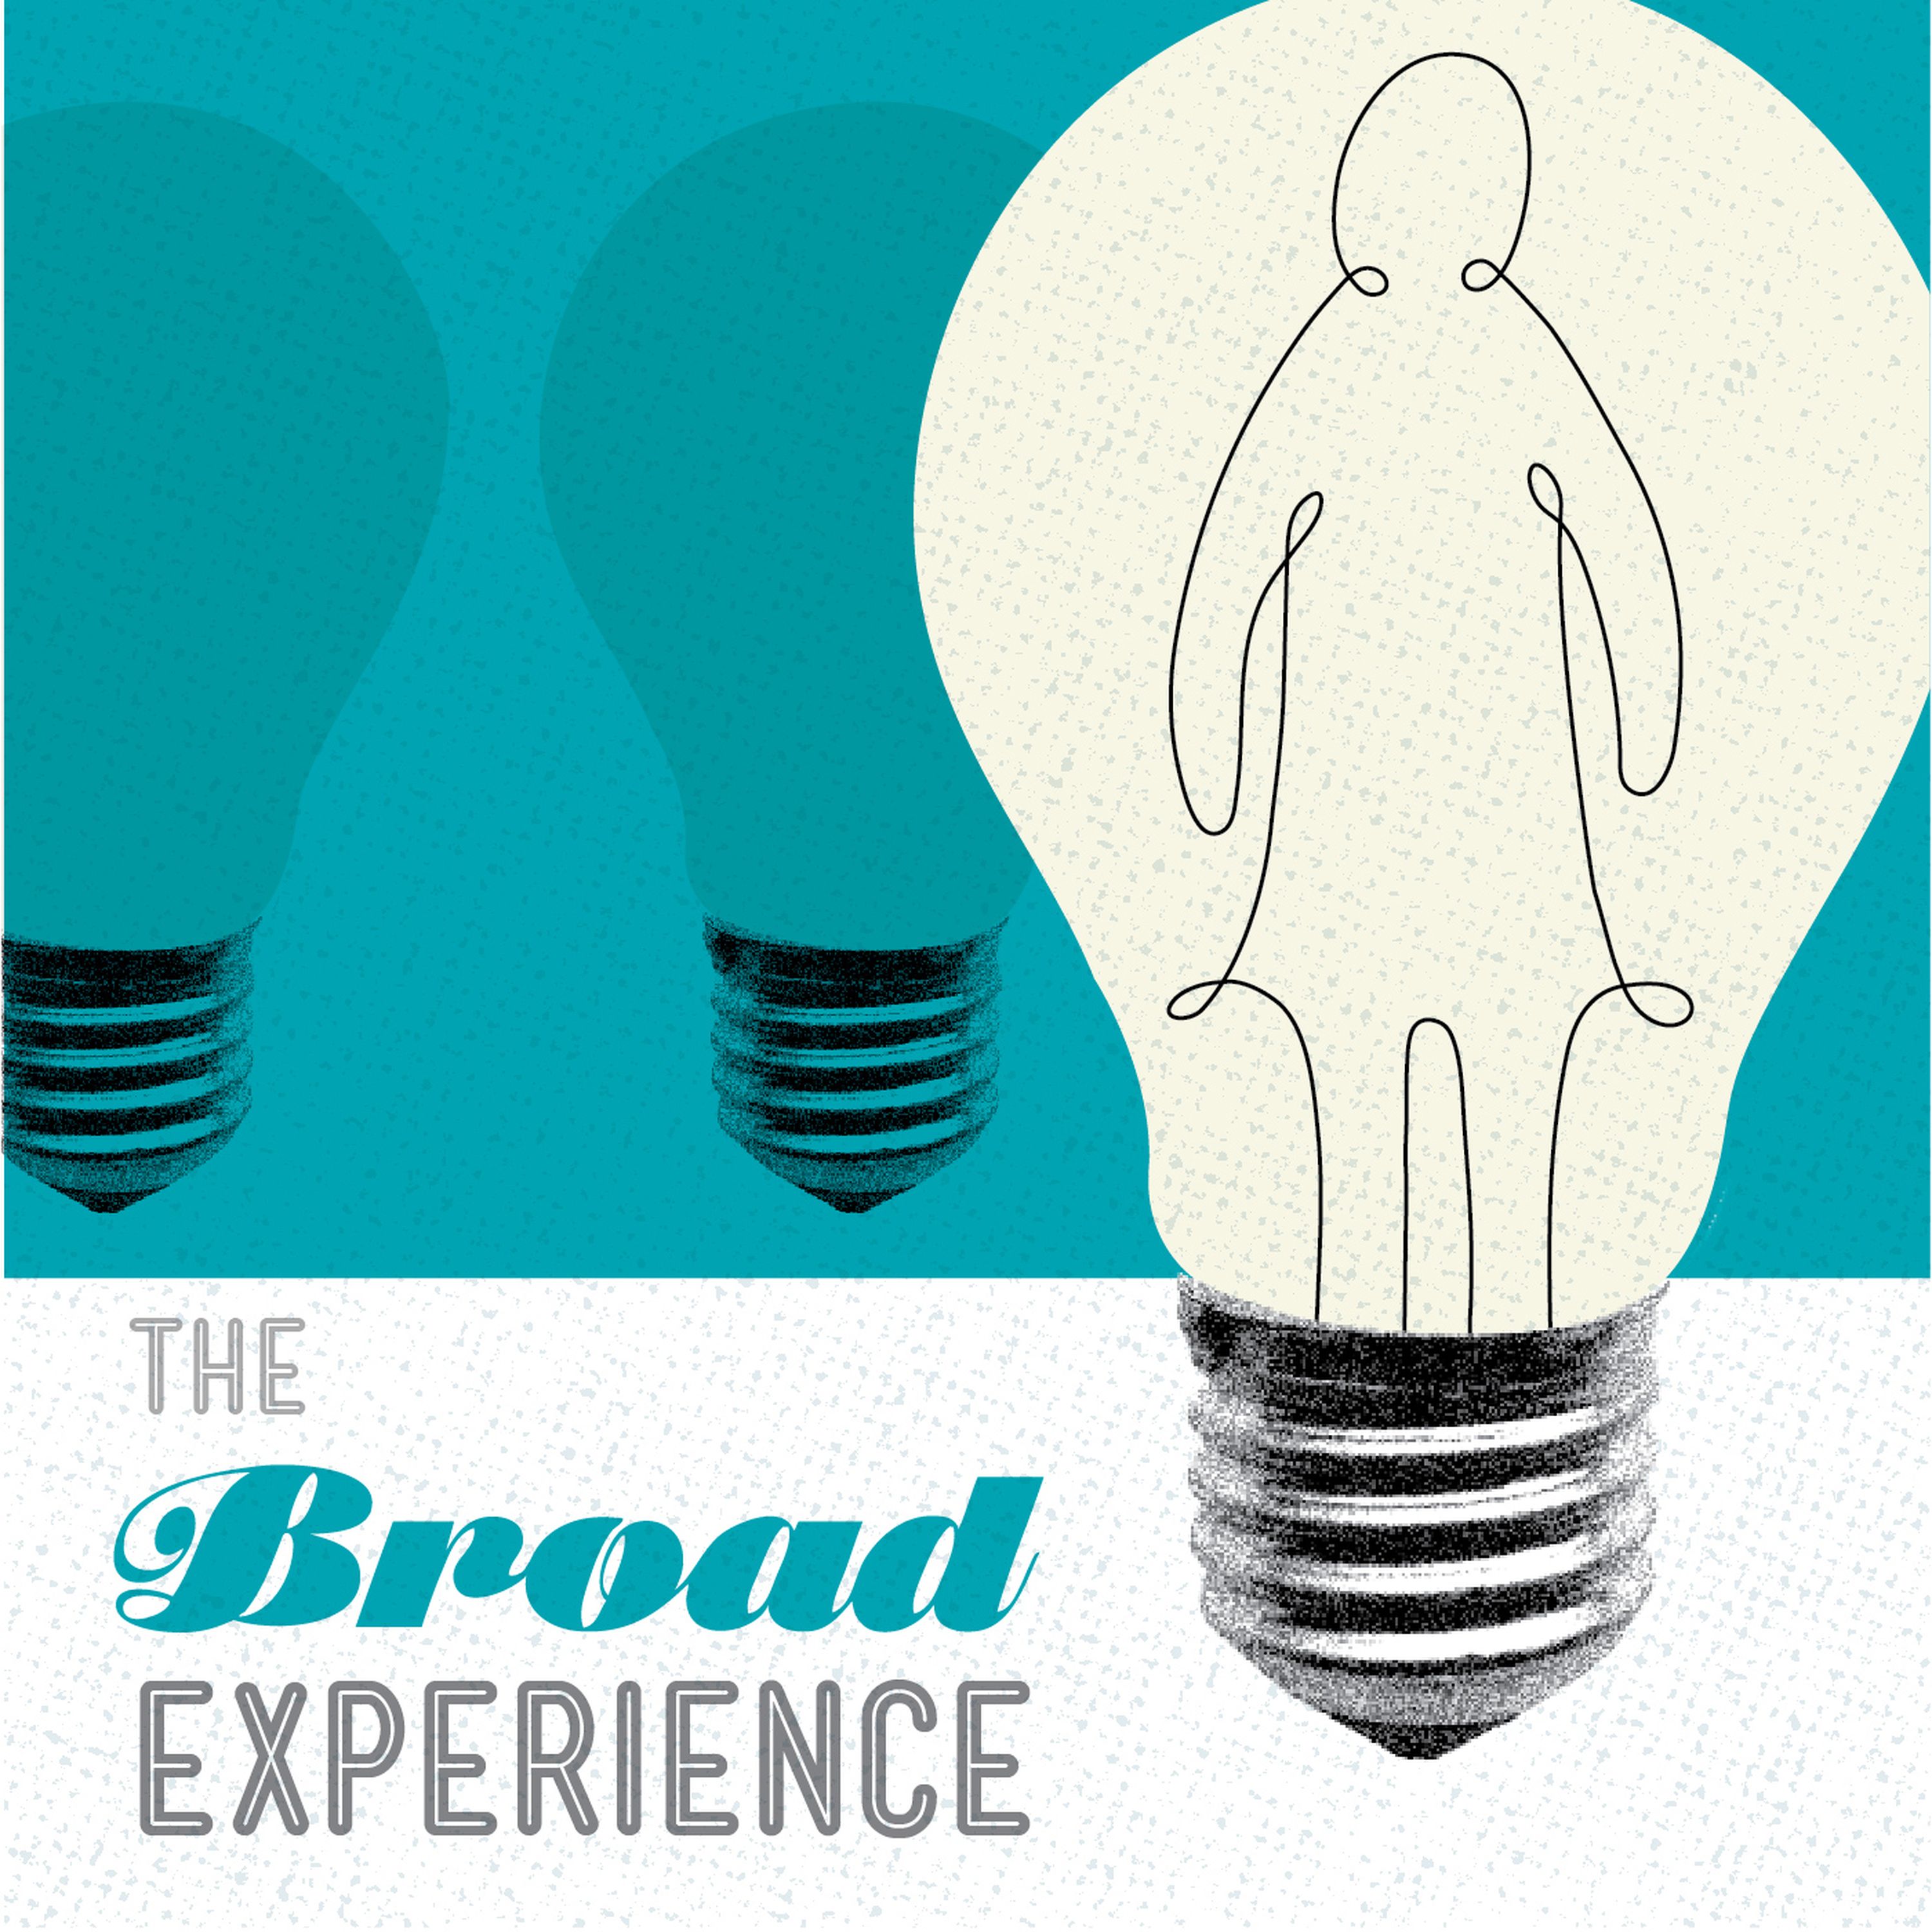 The Broad Experience 42: The outsider within: transgender in the workplace